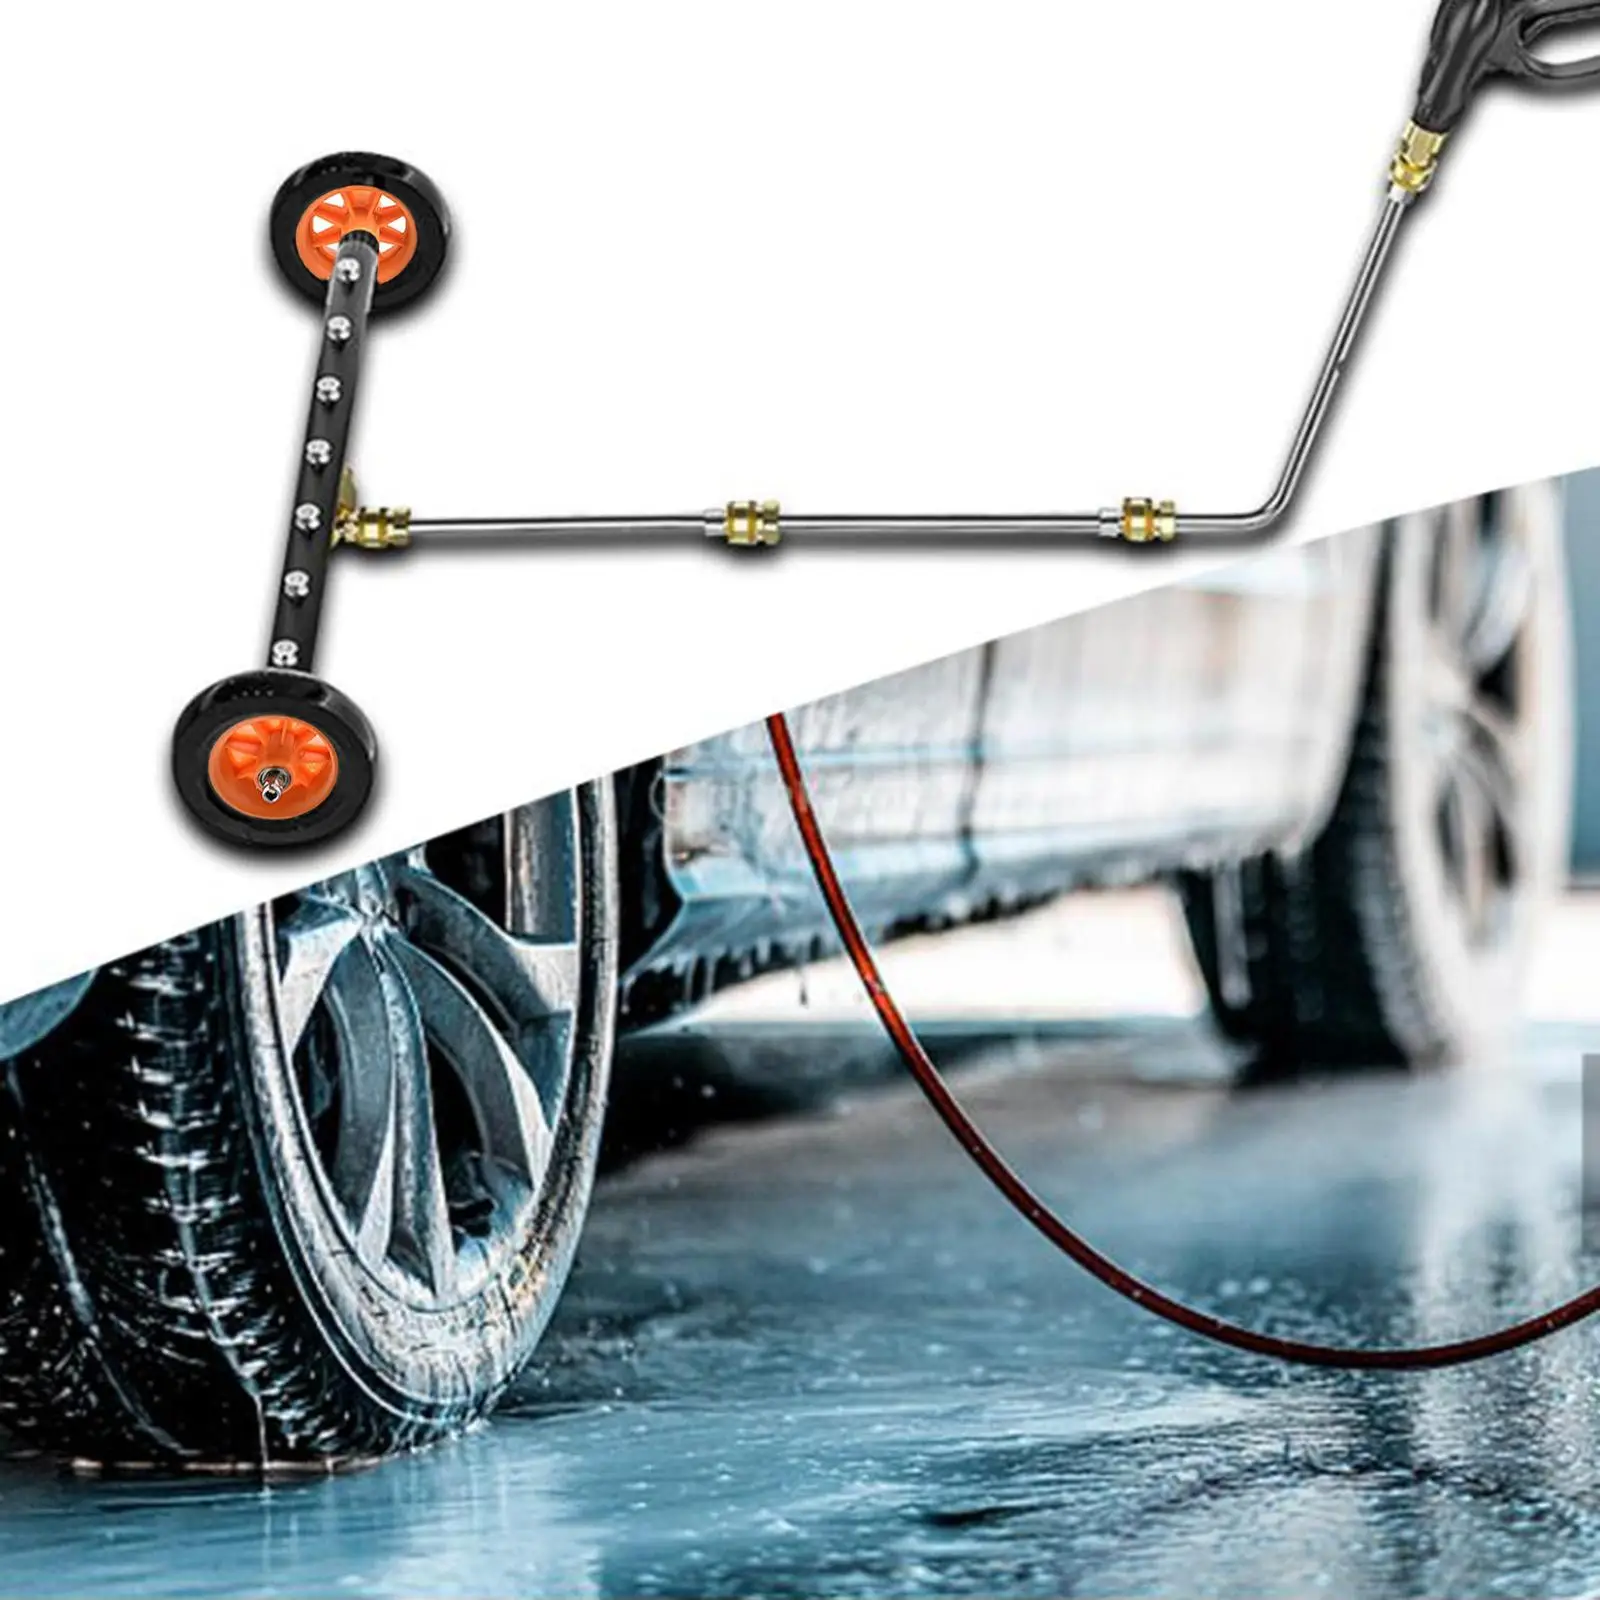 Pressure Washer Undercarriage Cleaner 90 Degree Angled Wands Car Wash Water Broom Pressure Washer under Car Cleaner for RV Car